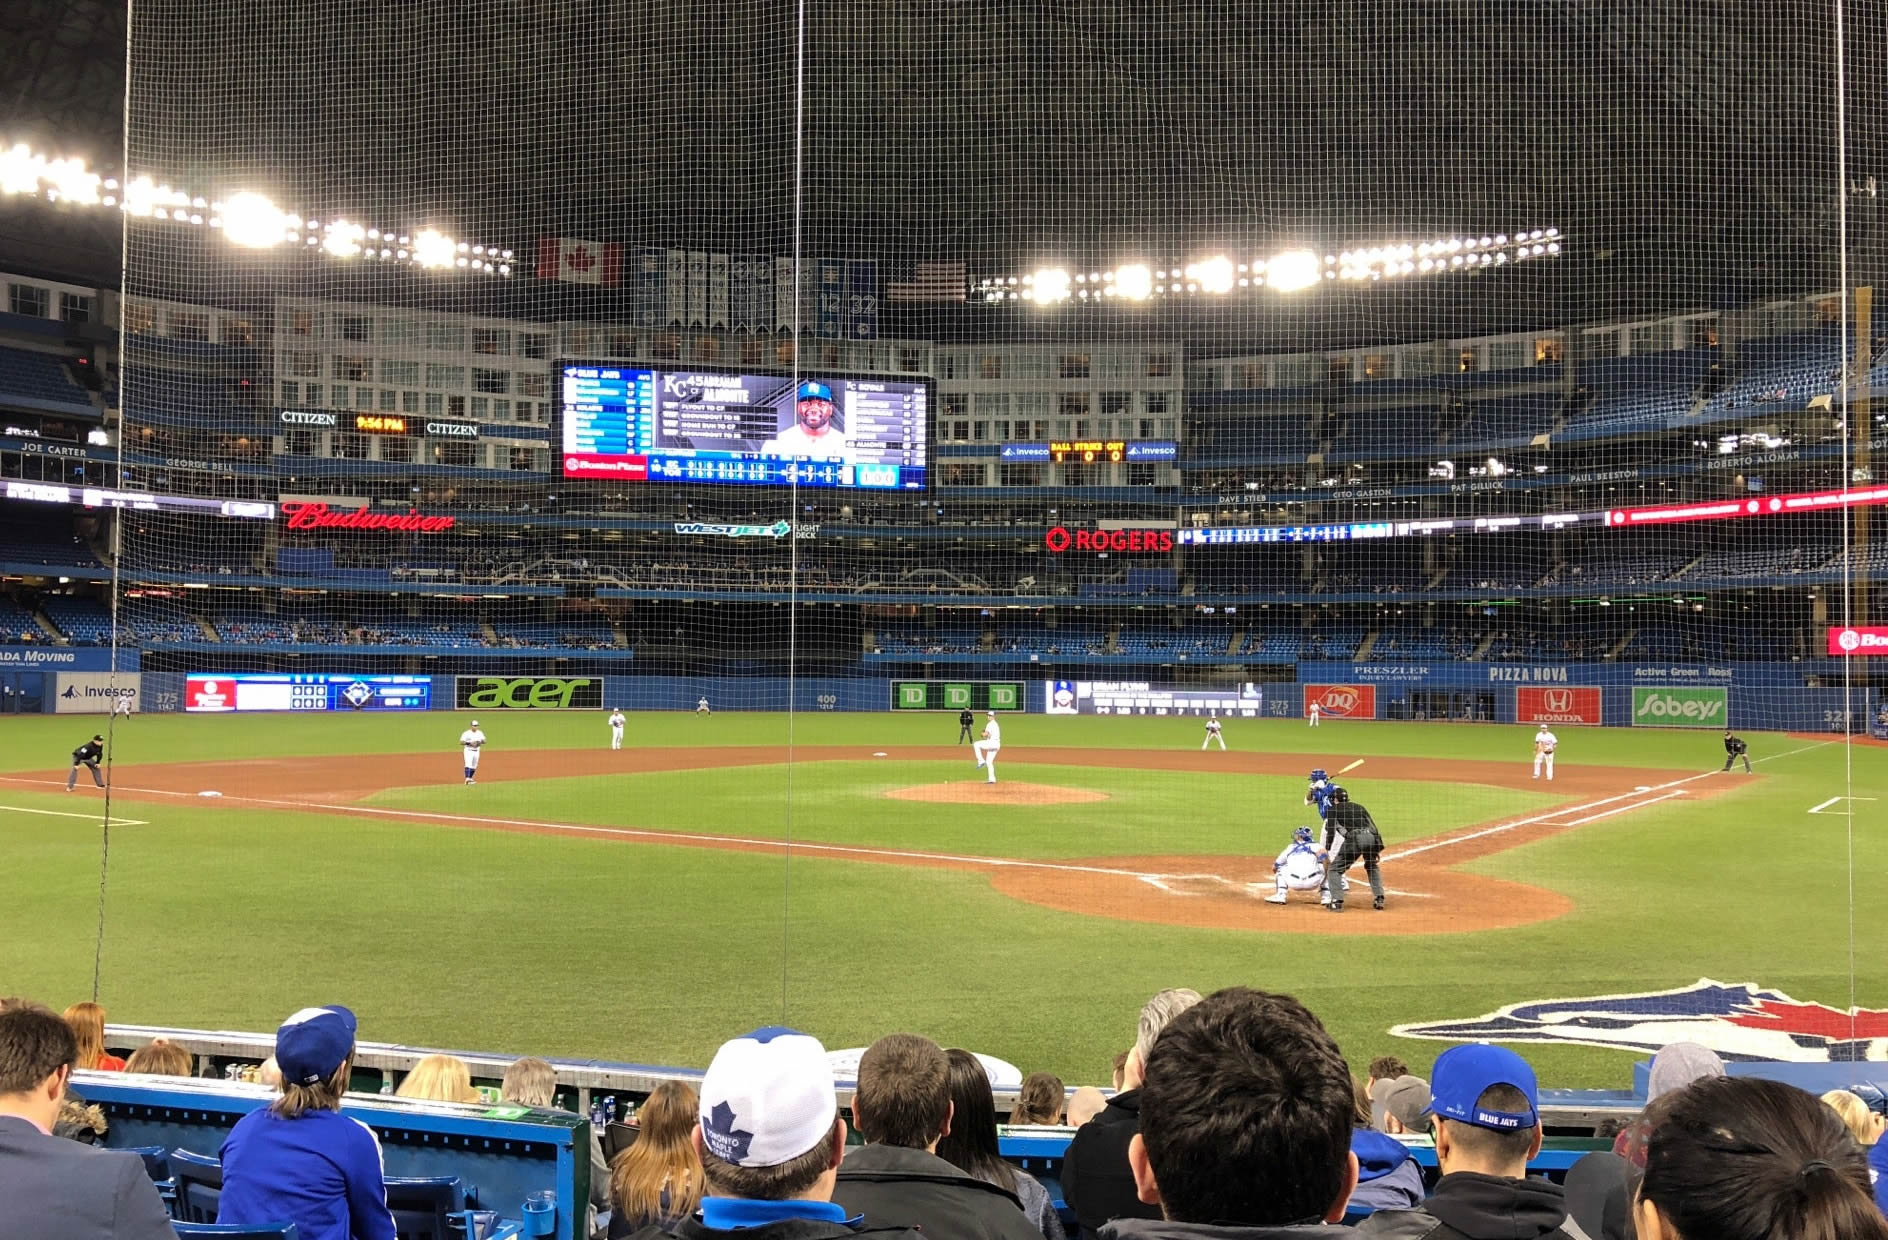 Section 122 at Rogers Centre 